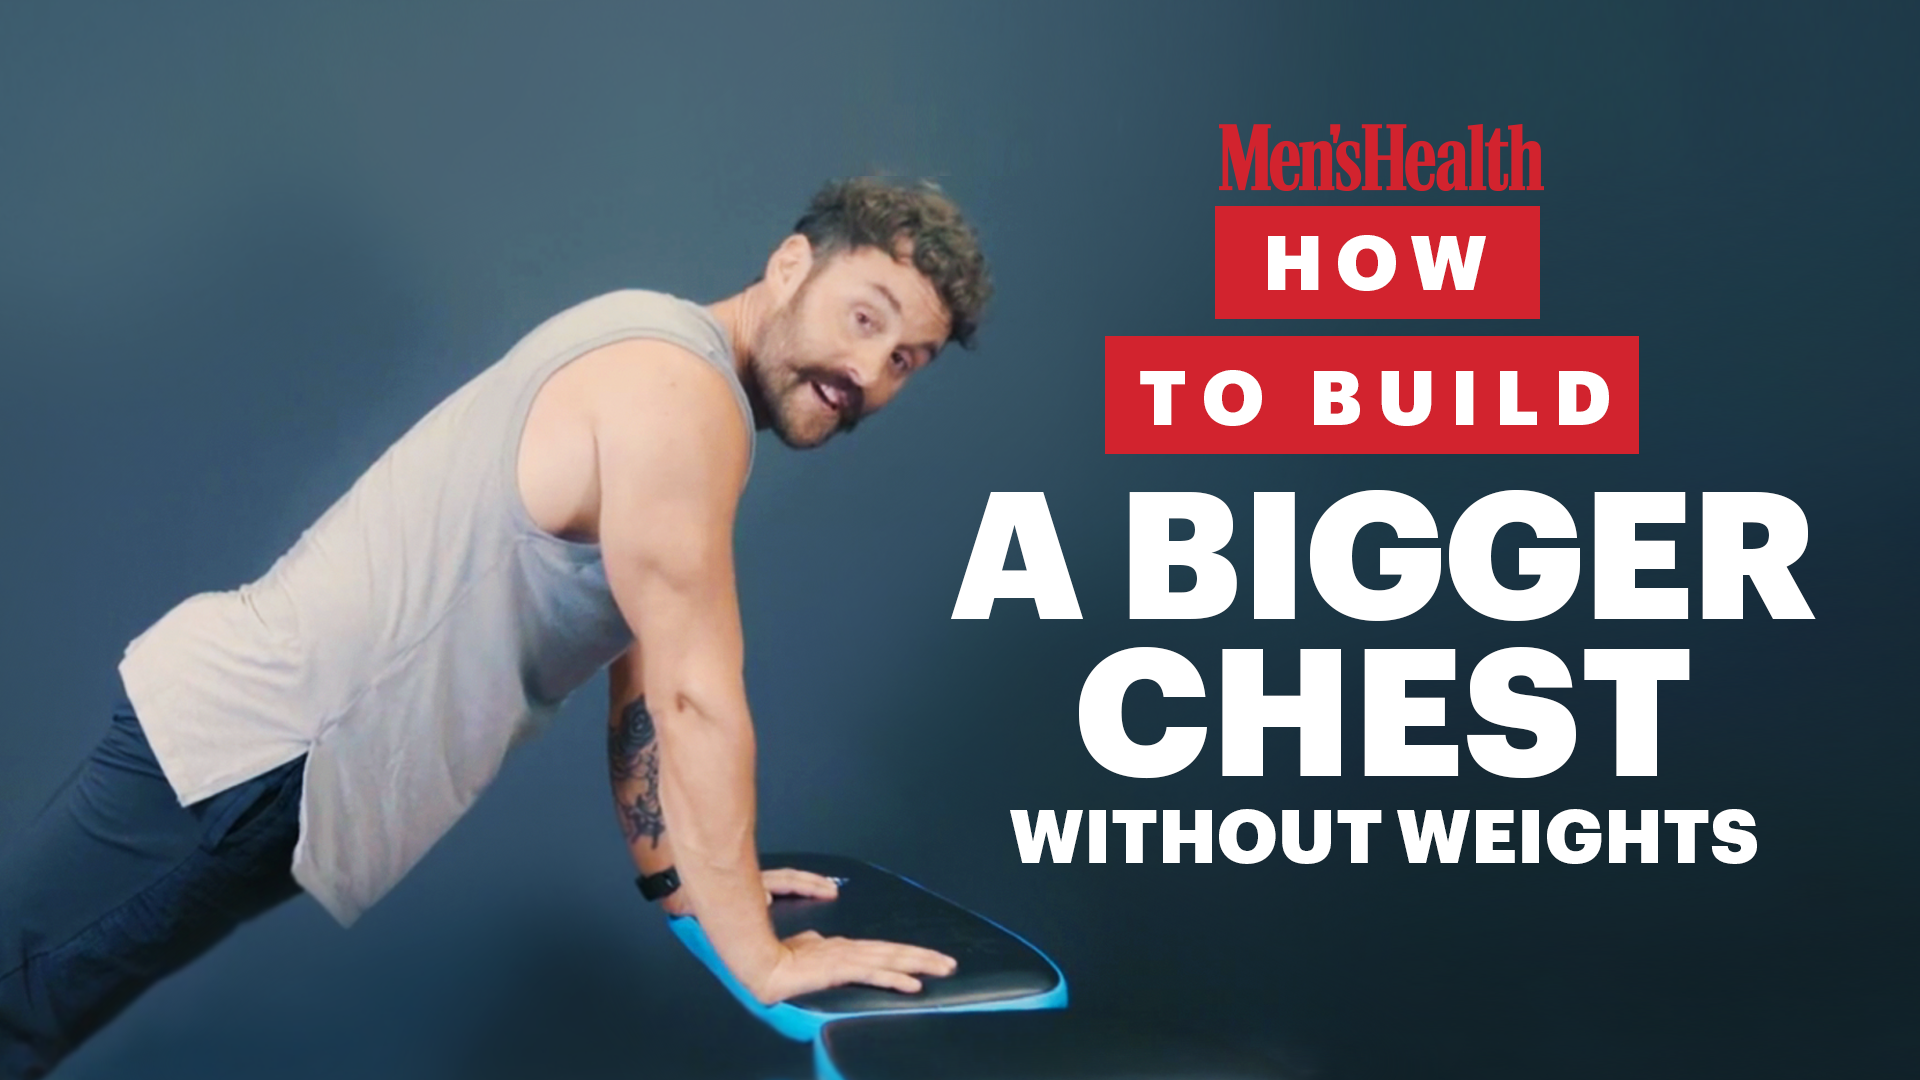 Exercises at Home to Build Muscle: 18 Moves with and Without Weights